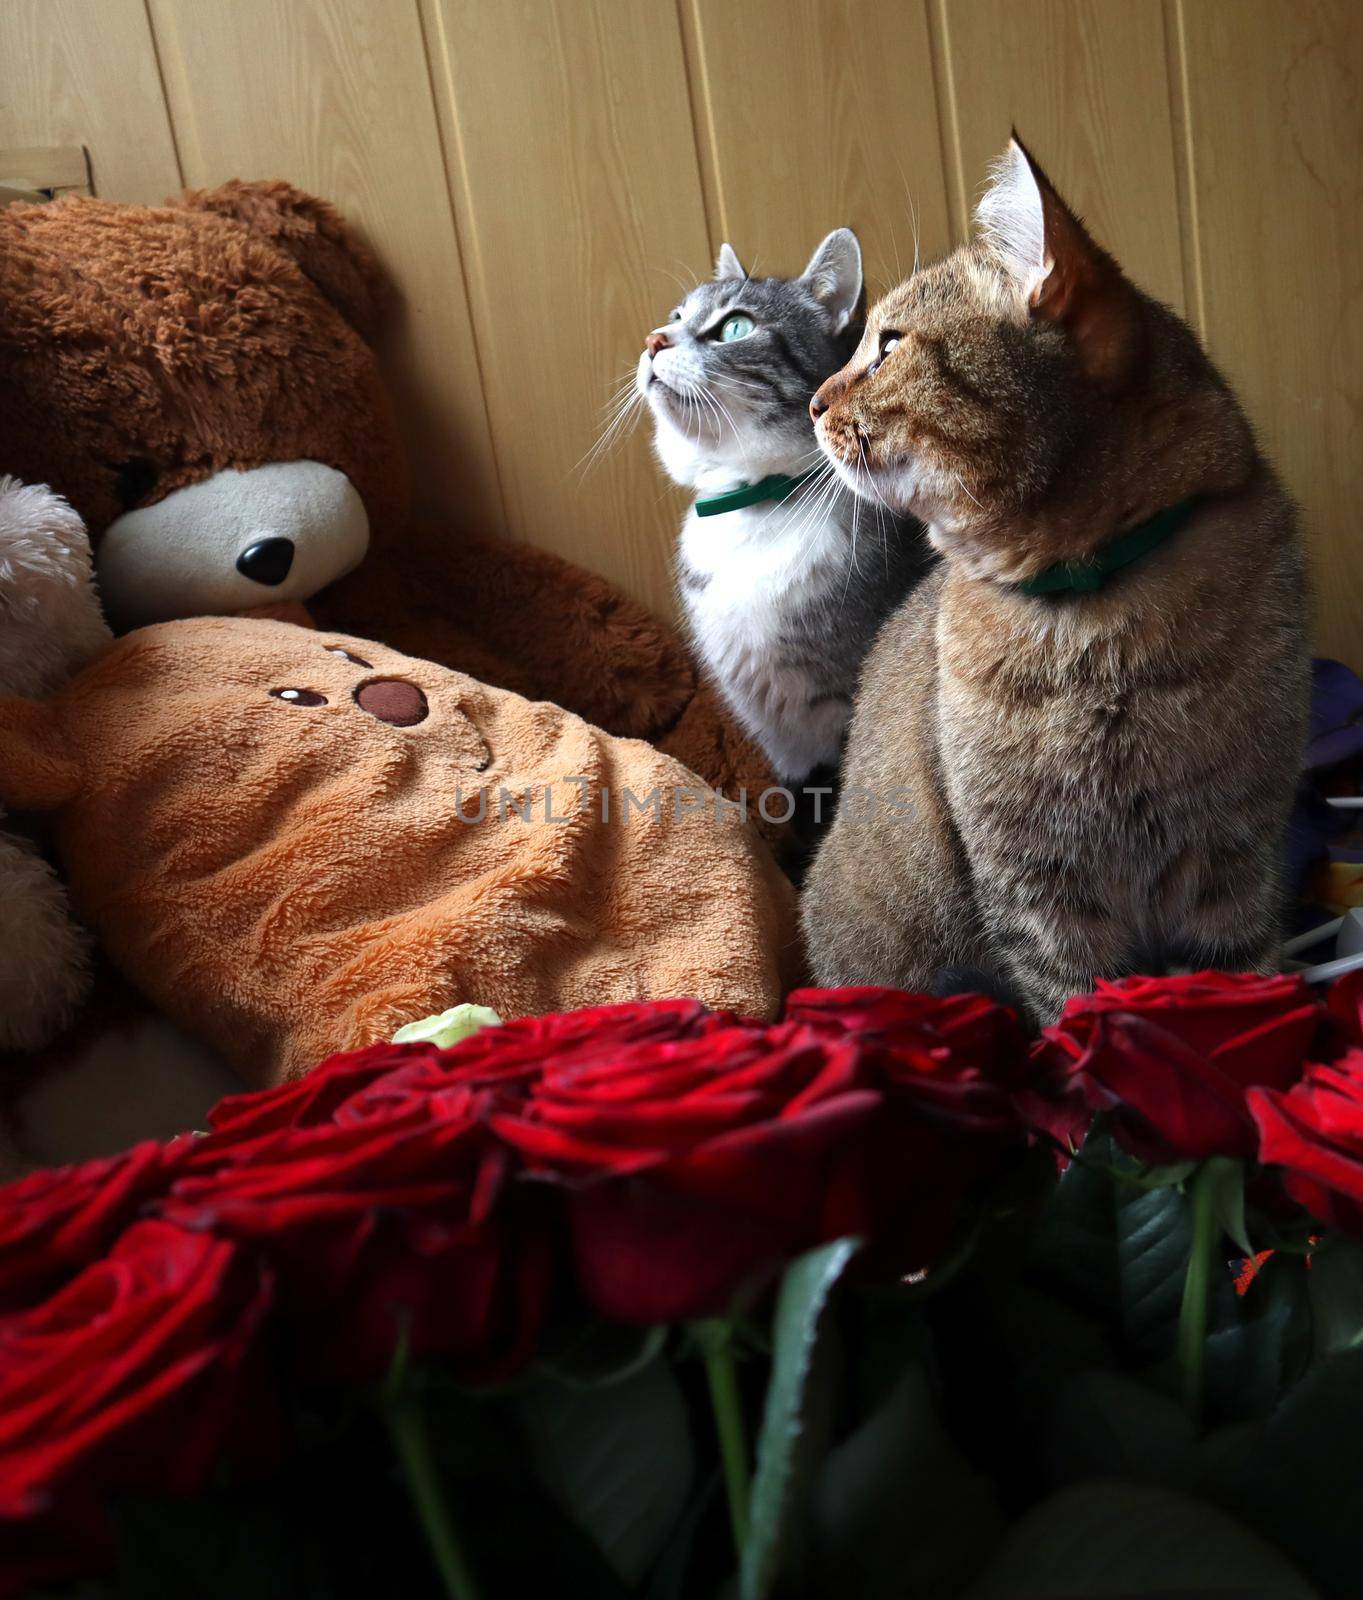 Gray and red cat sitting among the soft toys on the couch and looking out the window. A bouquet of red roses near the sofa